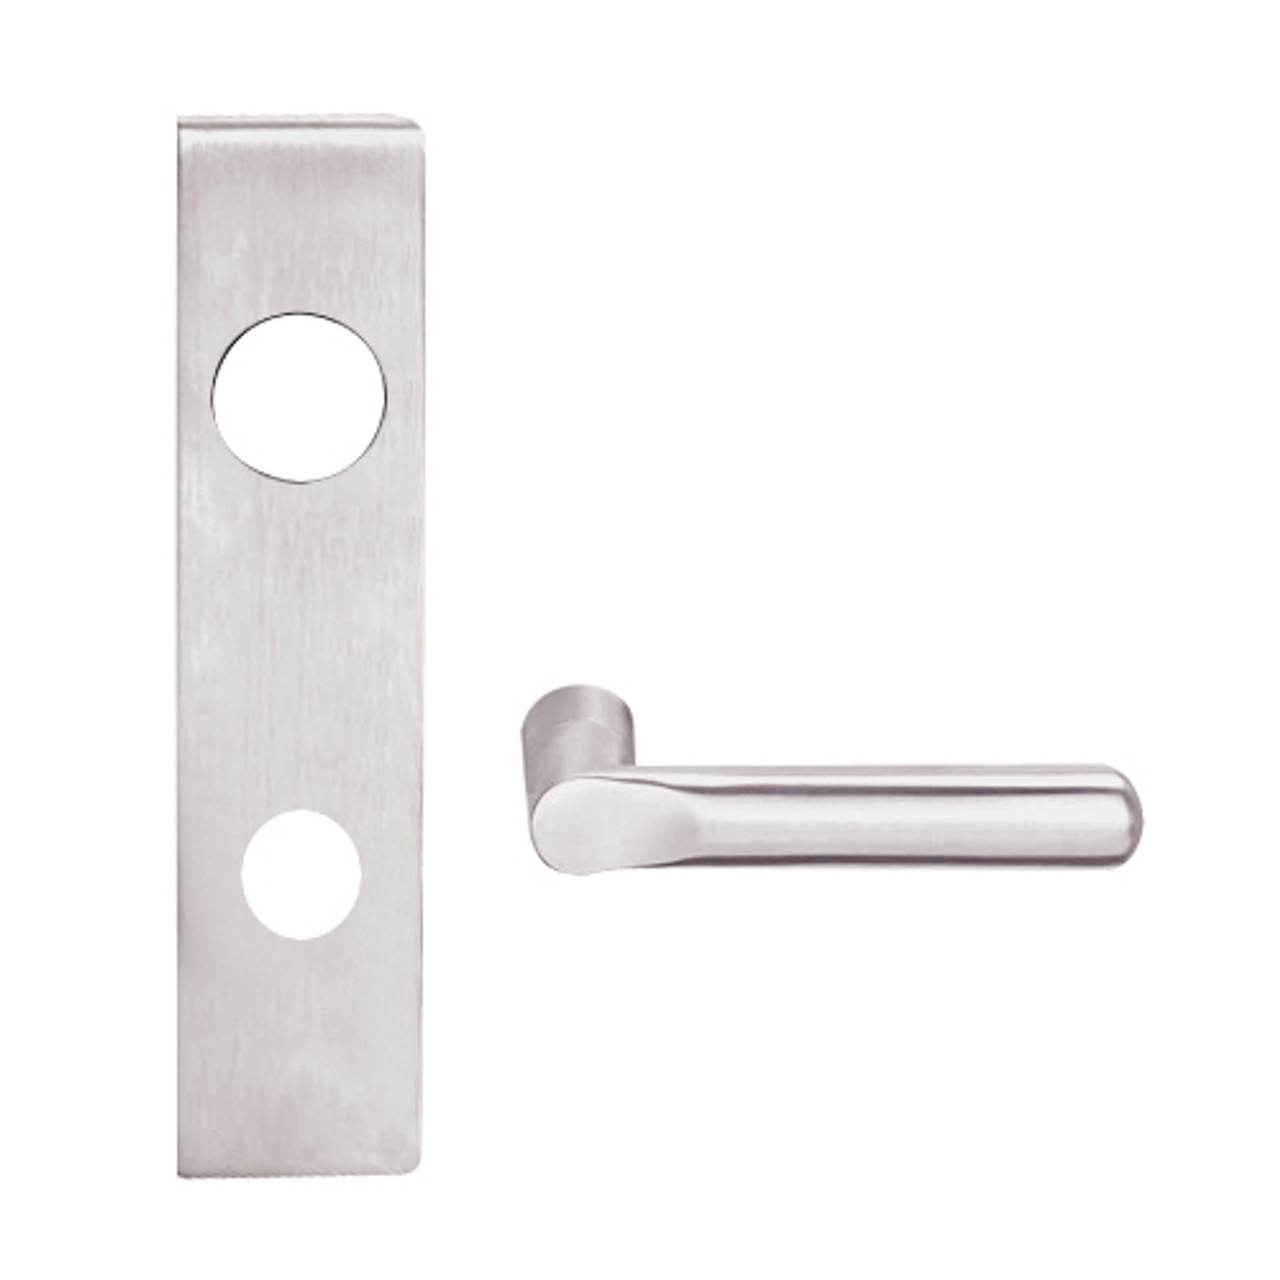 L9026J-18L-629 Schlage L Series Exit Lock with Cylinder Commercial Mortise Lock with 18 Cast Lever Design Prepped for FSIC in Bright Stainless Steel